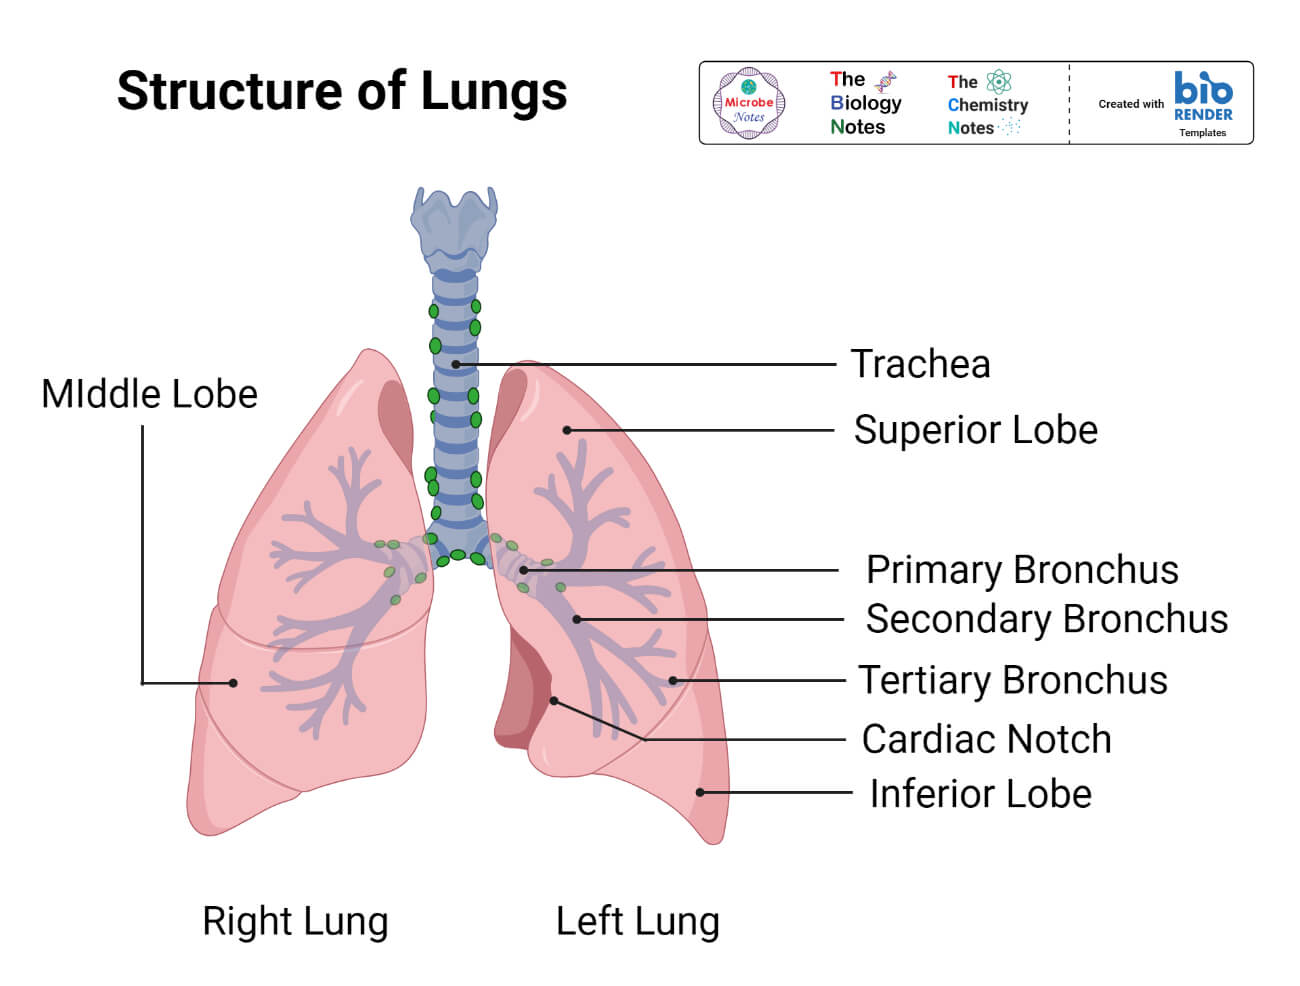 Structure of Lungs